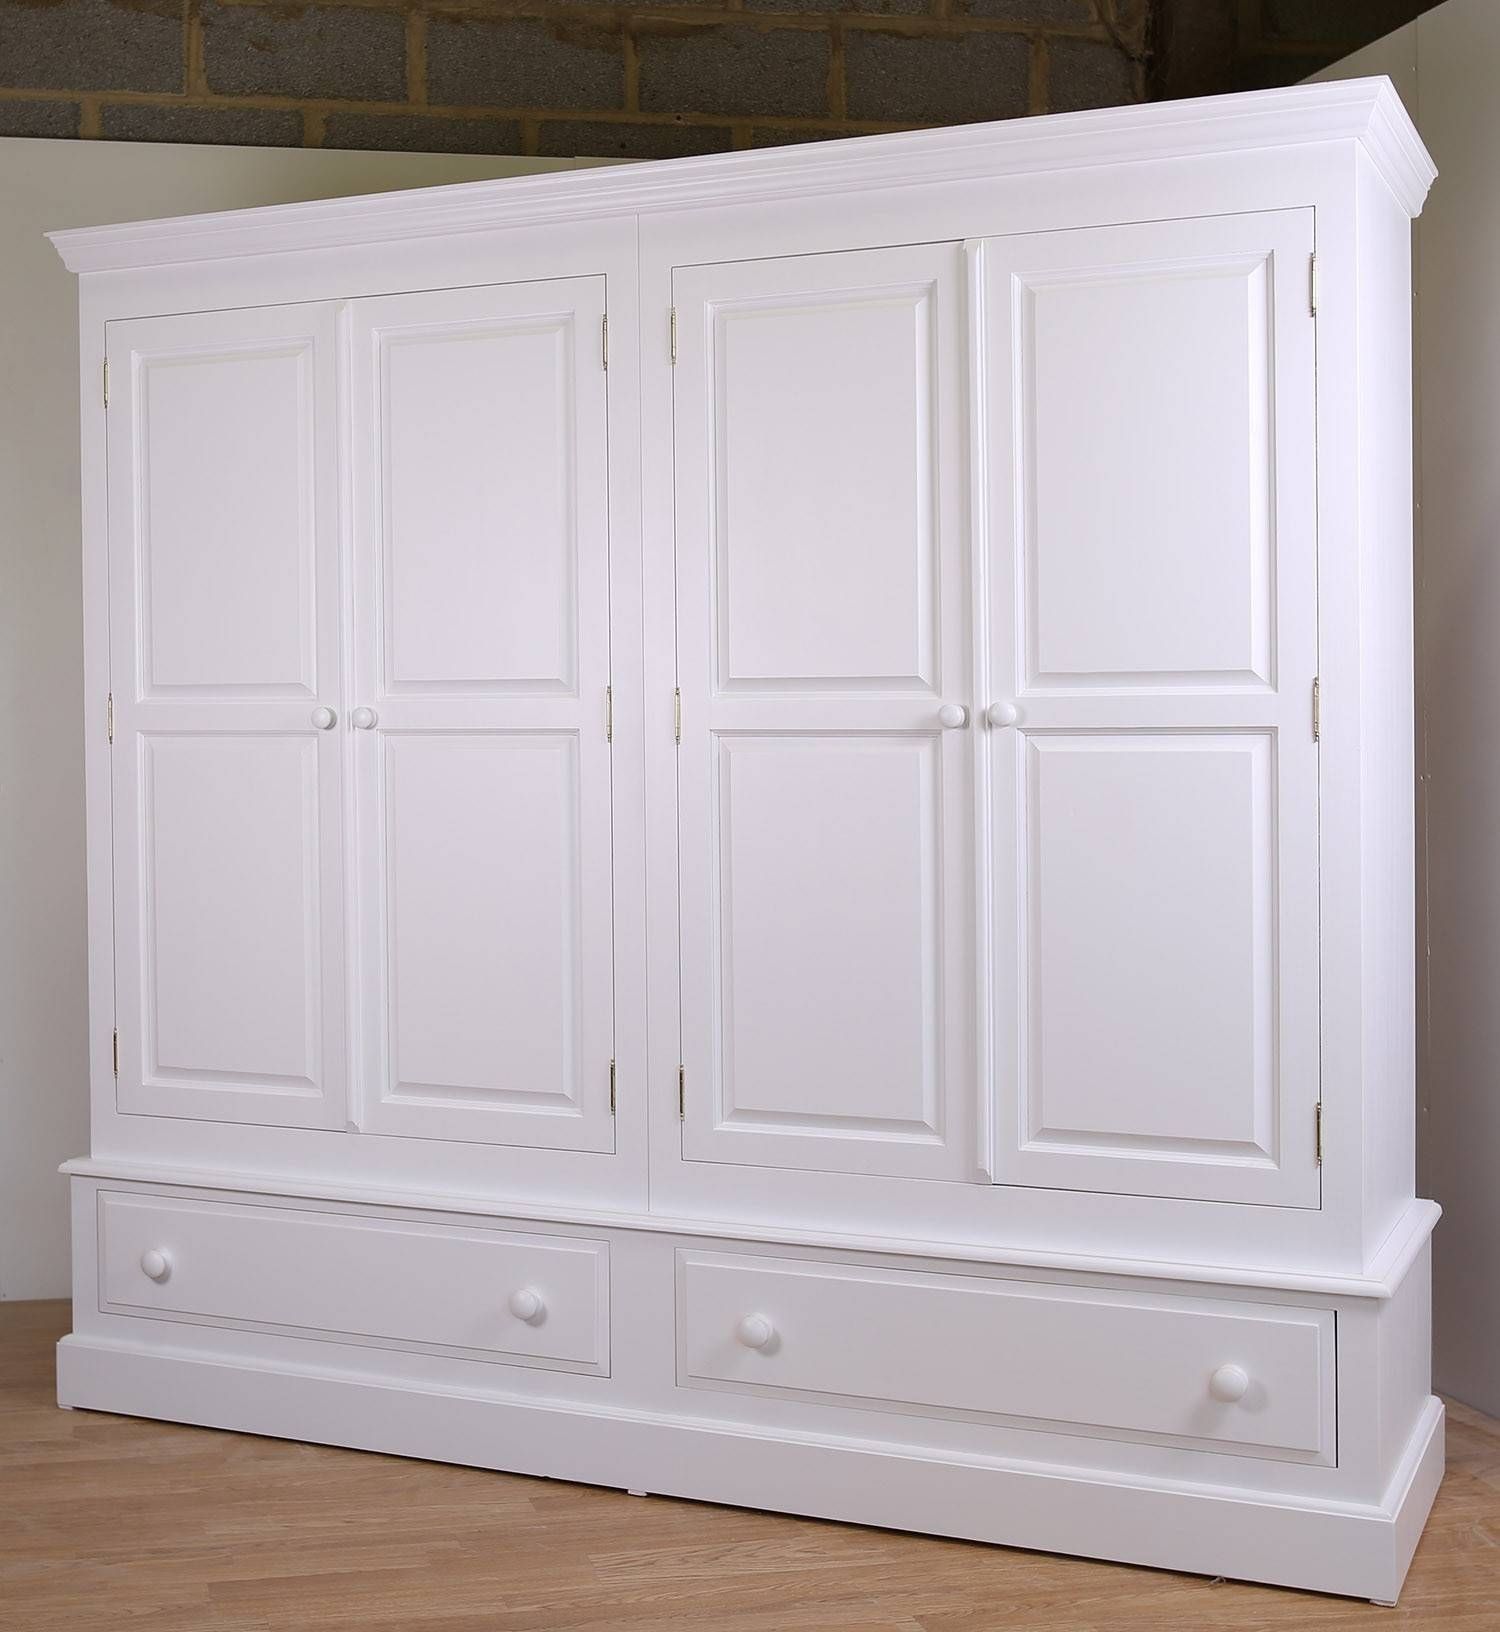 Farrow & Ball Painted 4 Door Wardrobe With Drawers In 3 Sizes Regarding Large White Wardrobes With Drawers (Photo 2 of 15)